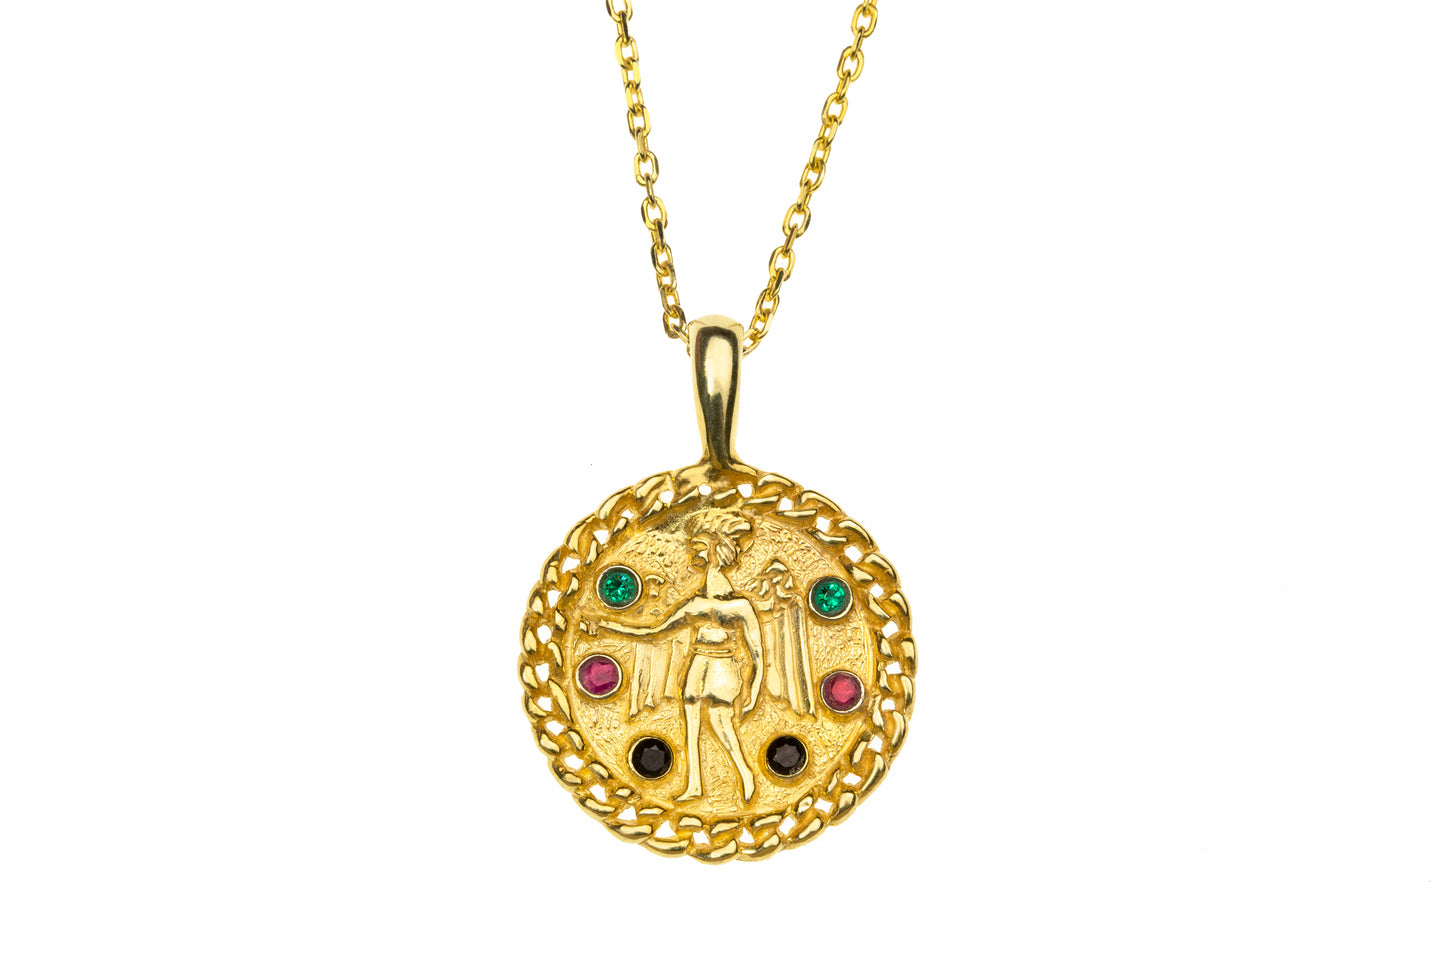 Gaia angel gold necklace